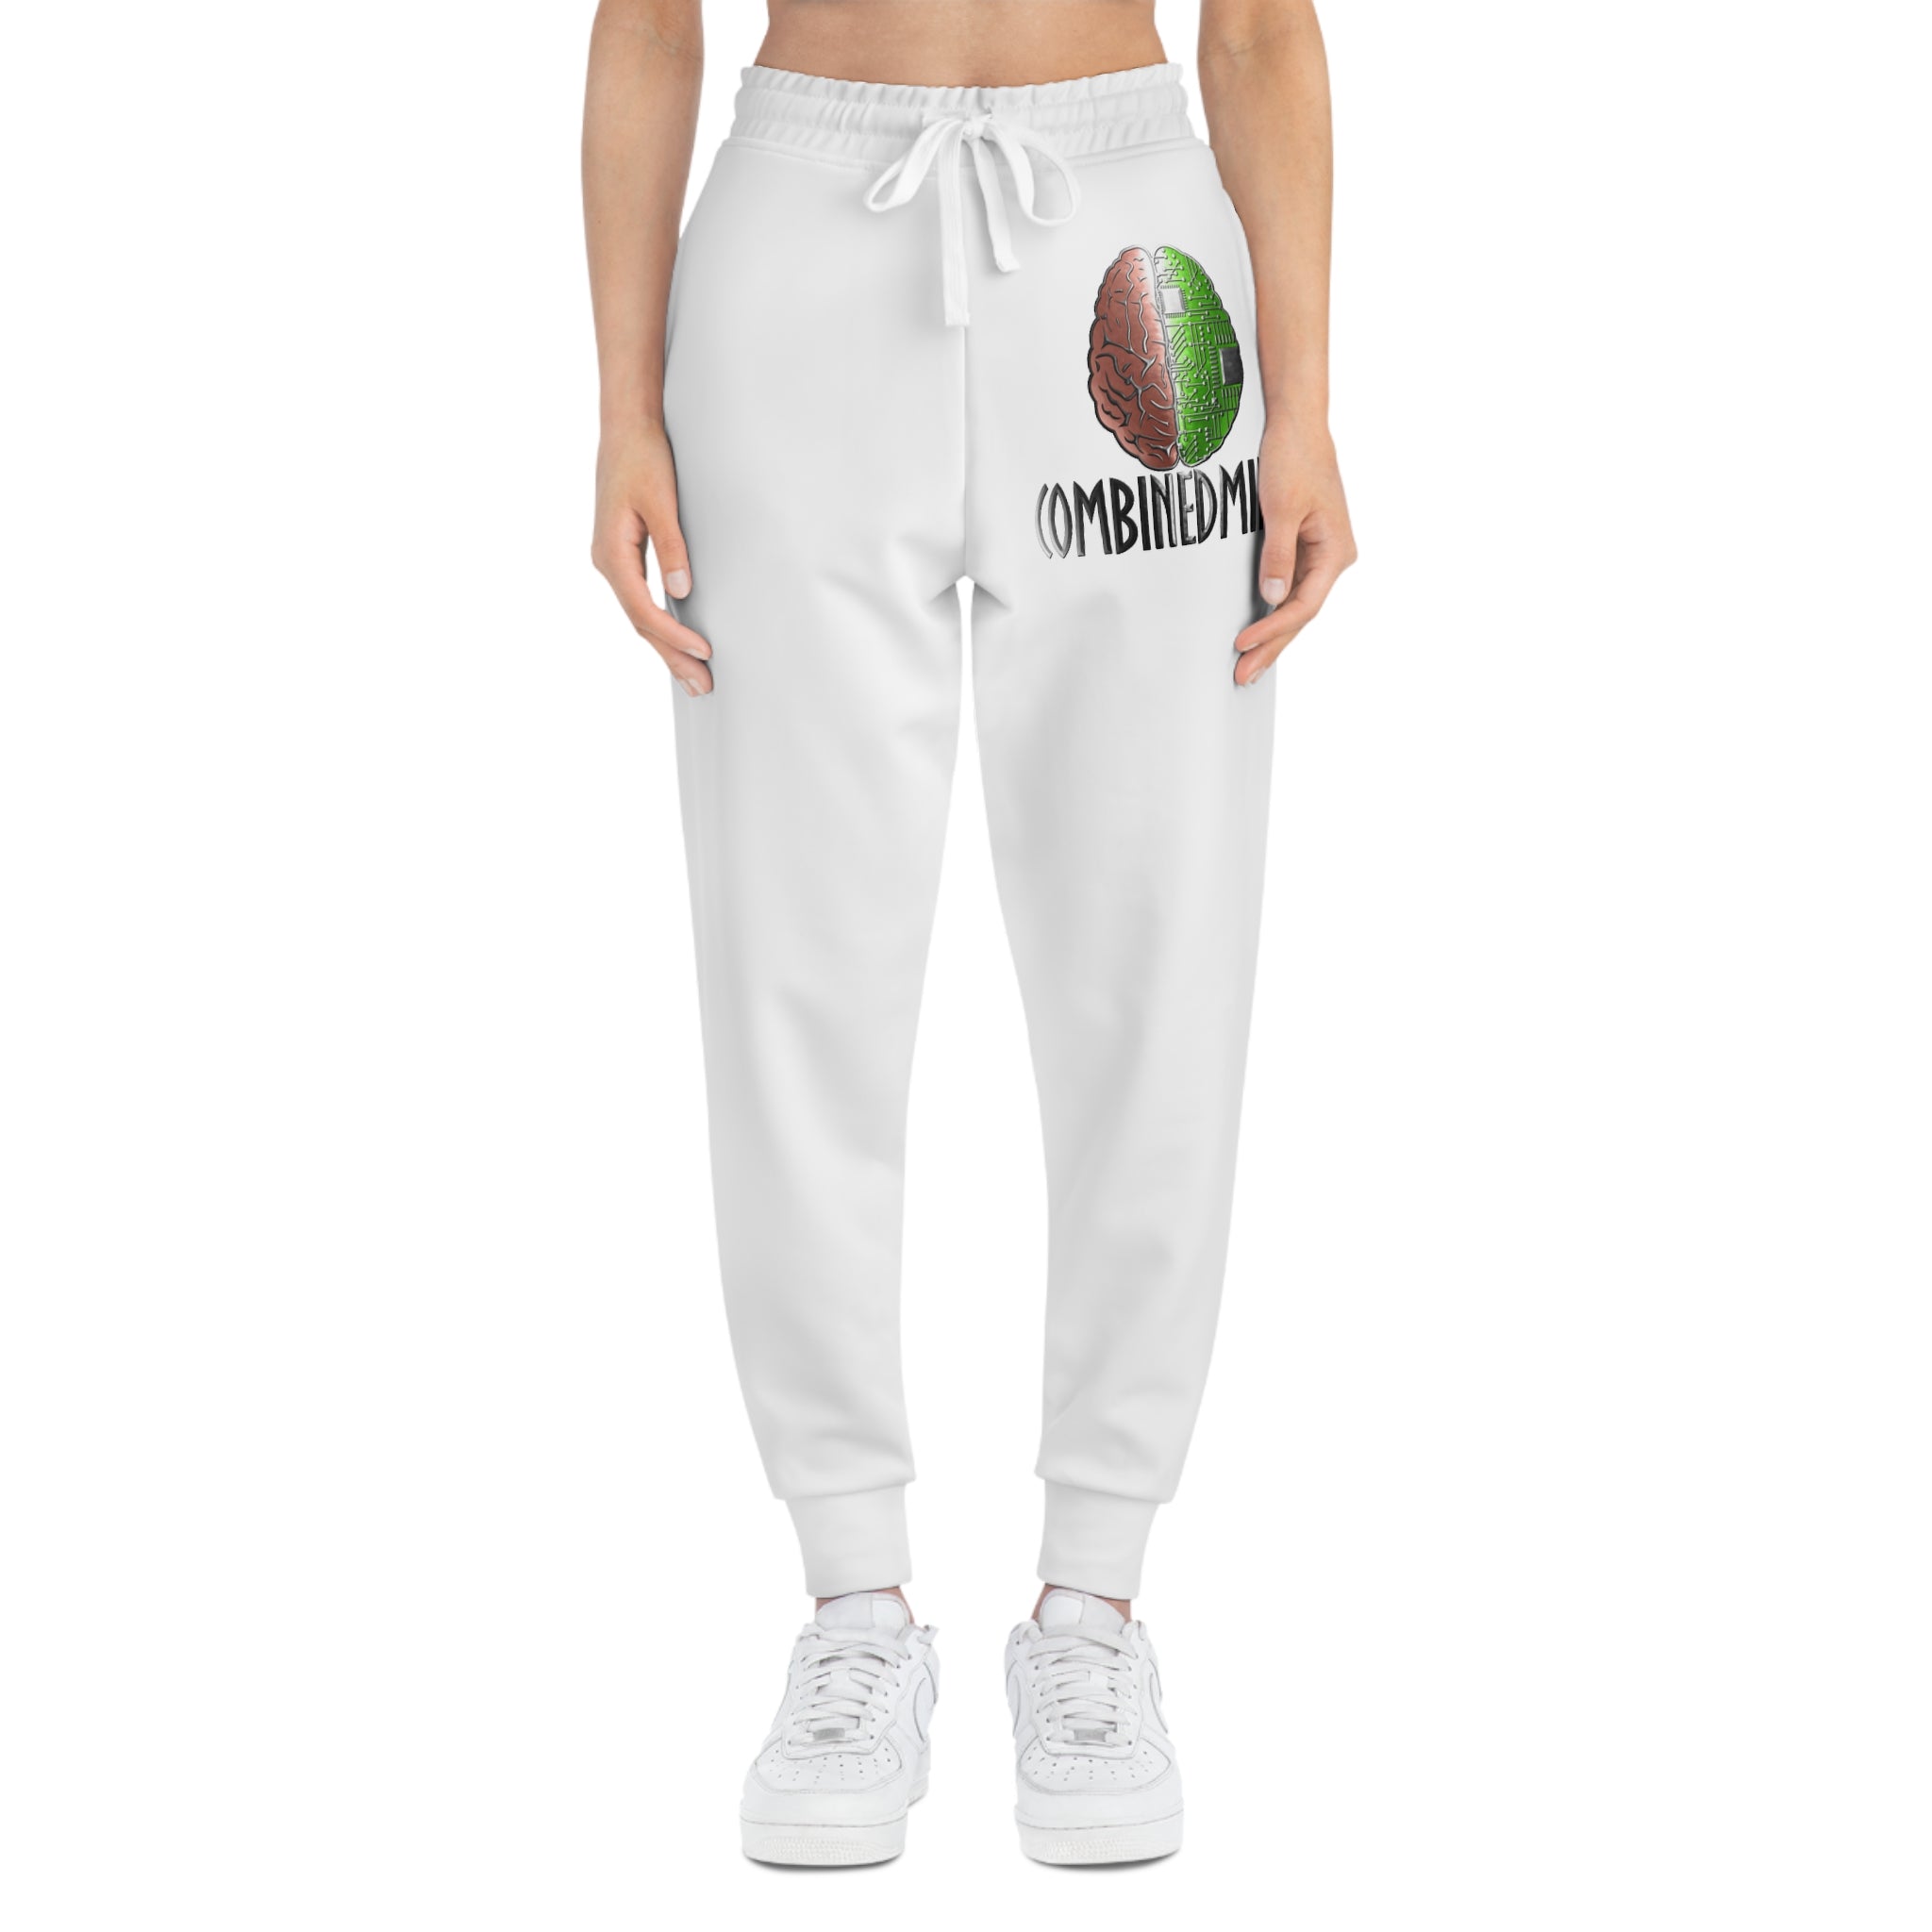 CombinedMinds Athletic Joggers White/Color Logo